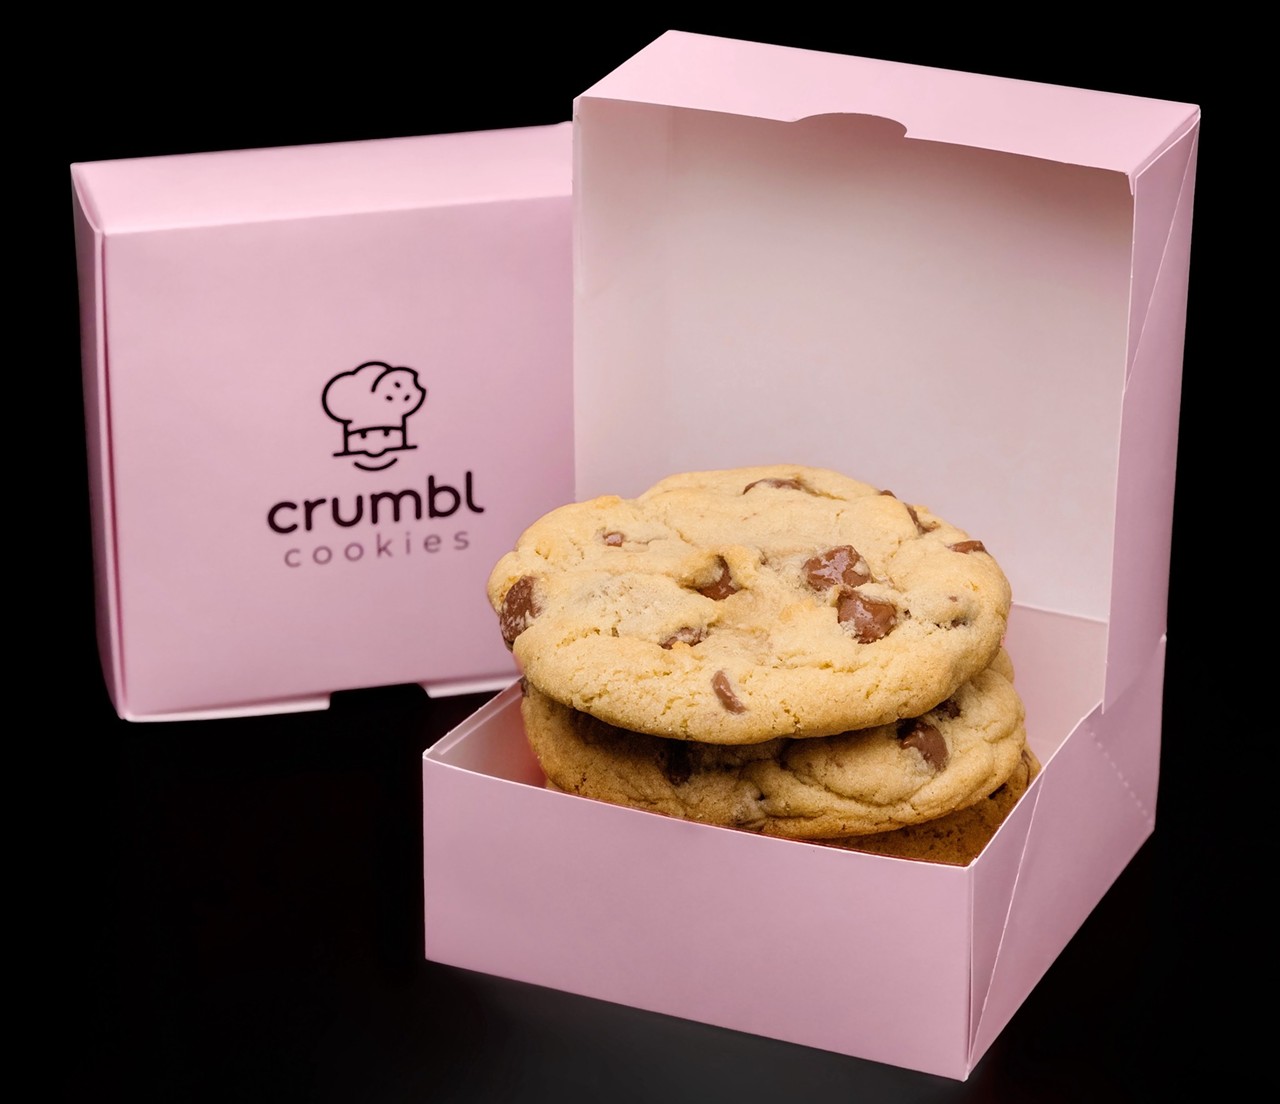 Crumbl Cookies  
1902-A S Dale Mabry Hwy., Tampa
With multiple locations in surrounding areas, it’s about time that Crumbl Cookies comes to Tampa. Known for its rotating menu of unique and decadent cookie flavors, this week includes s’mores and walnut fudge brownie, alongside classic menu favorites like milk chocolate chip. Cookies not enough for you? Crumbl serves ice cream as well.
Photo via Photo via Crumbl Cookies/Facebook